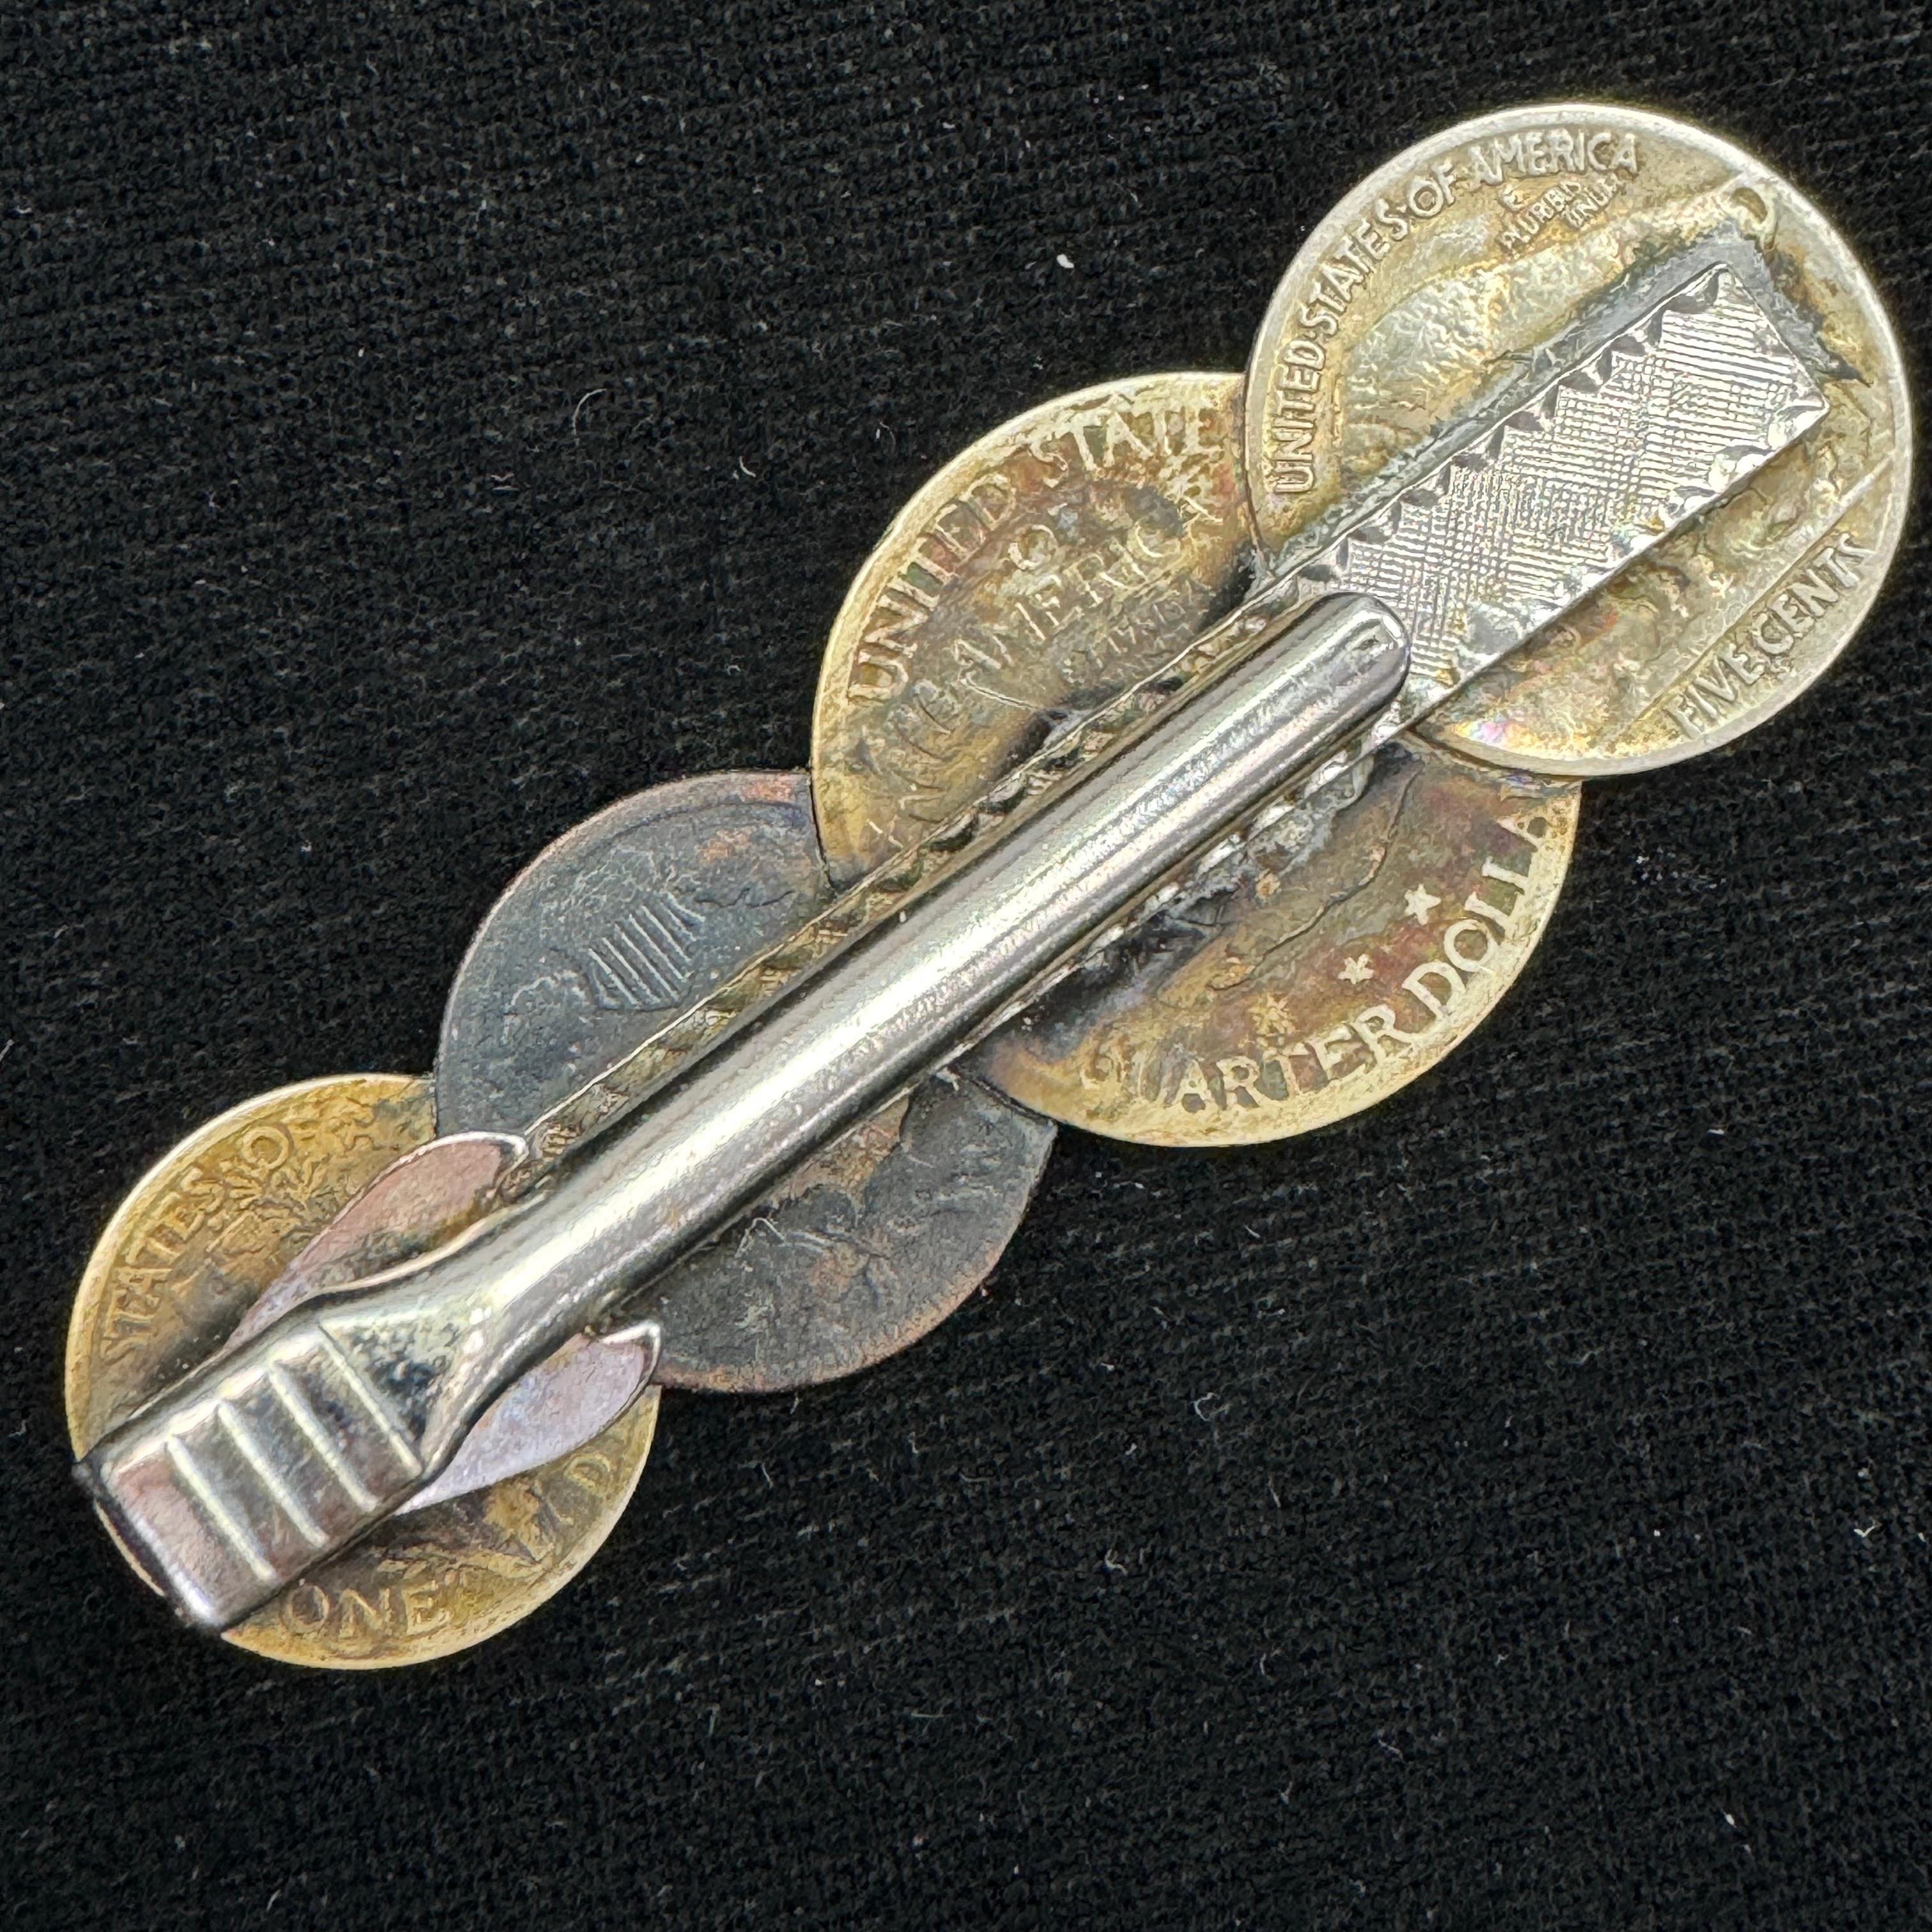 Vintage tie clasp with Indian cent, buffalo nickel, Mercury dime & standing Liberty quarter